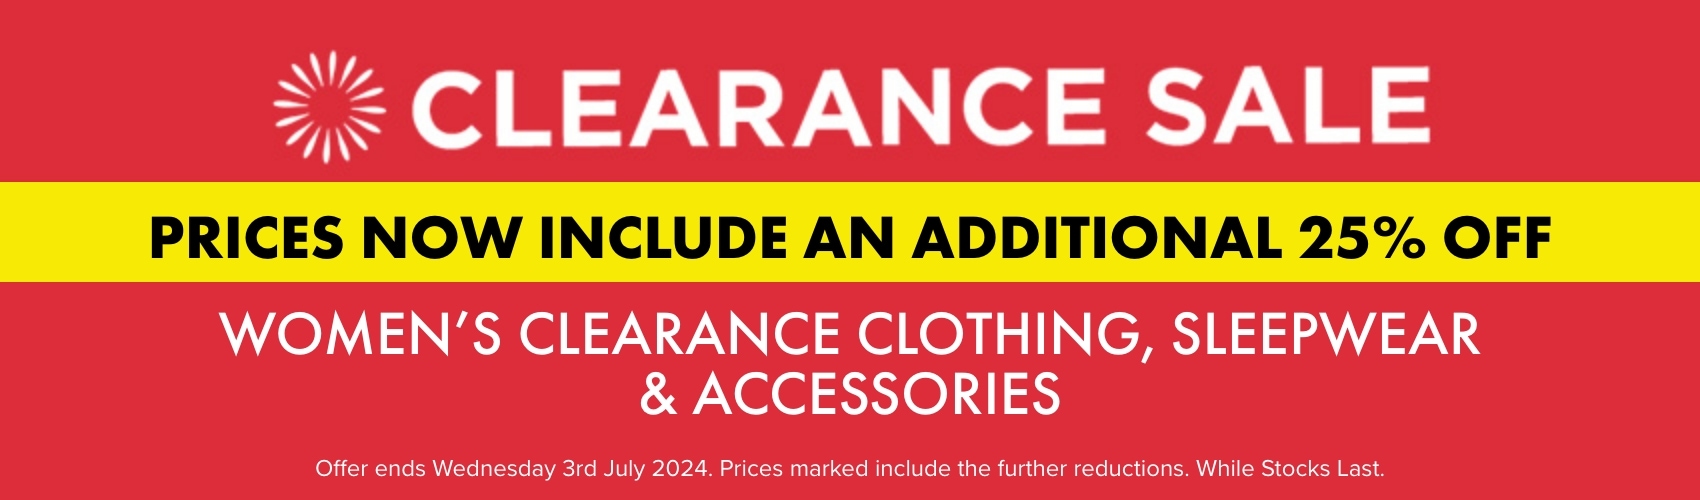 Take a Further 25% OFF Women's Clearance